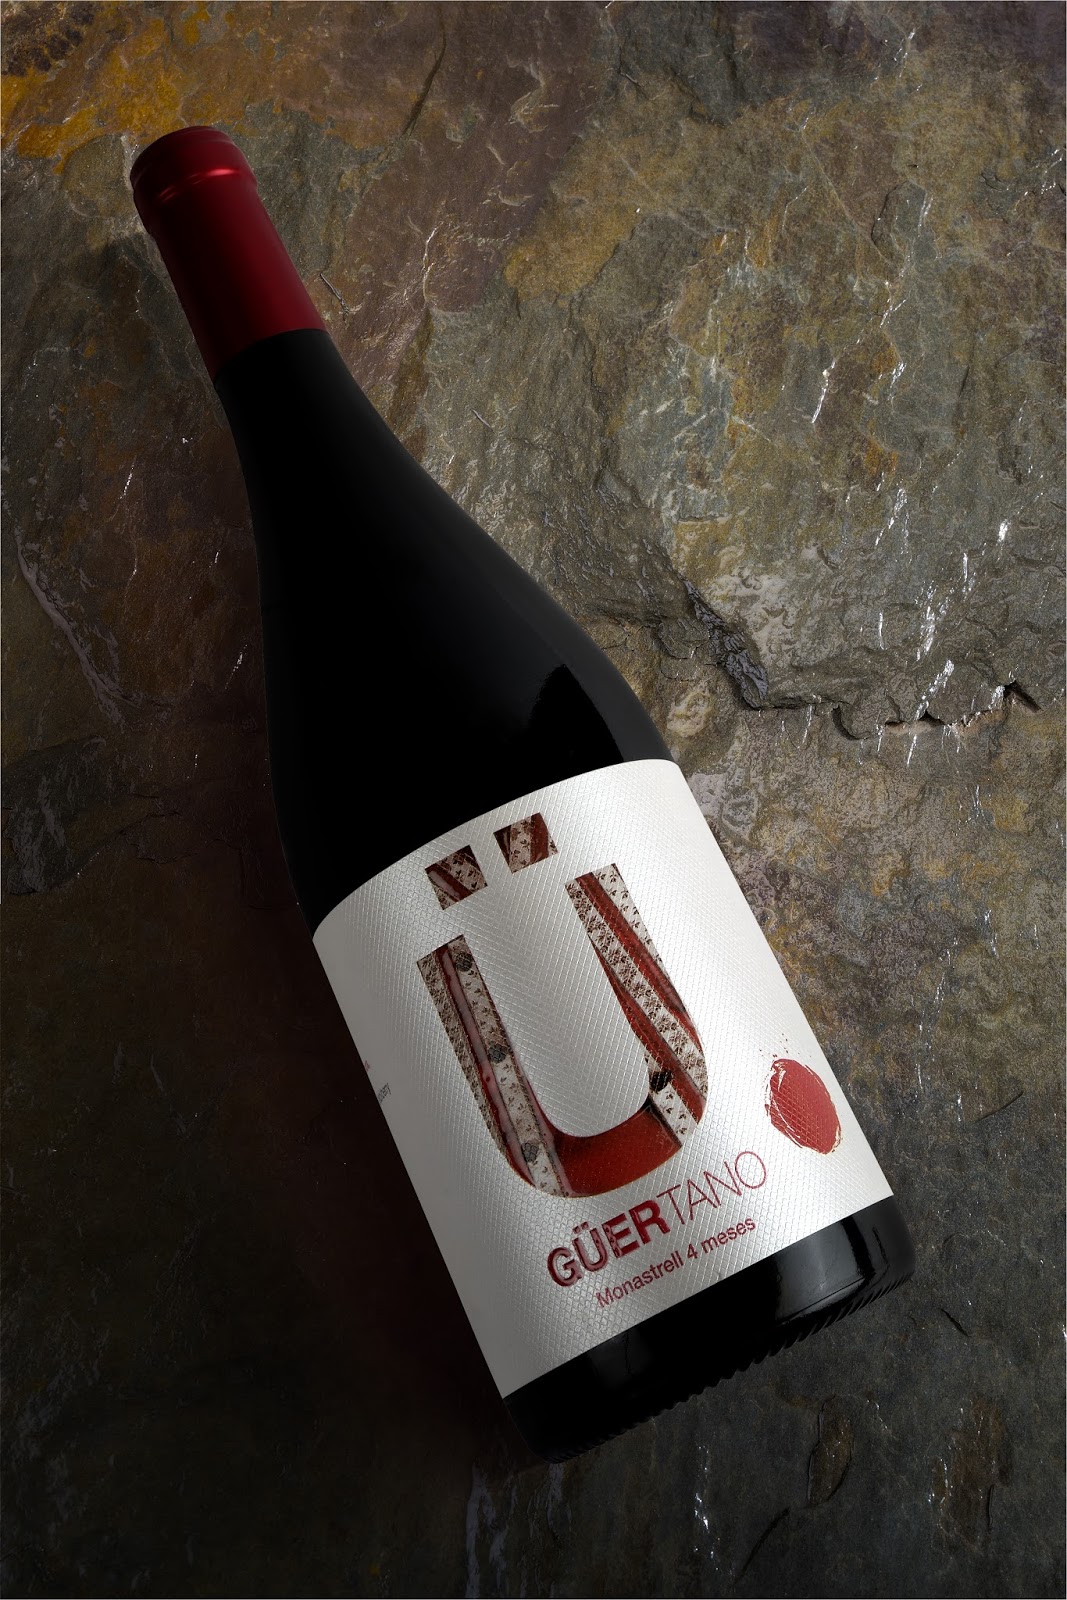 Packaging Design for Wine that is Playing with Letter, Typography and Words from the region Murcia, Spain